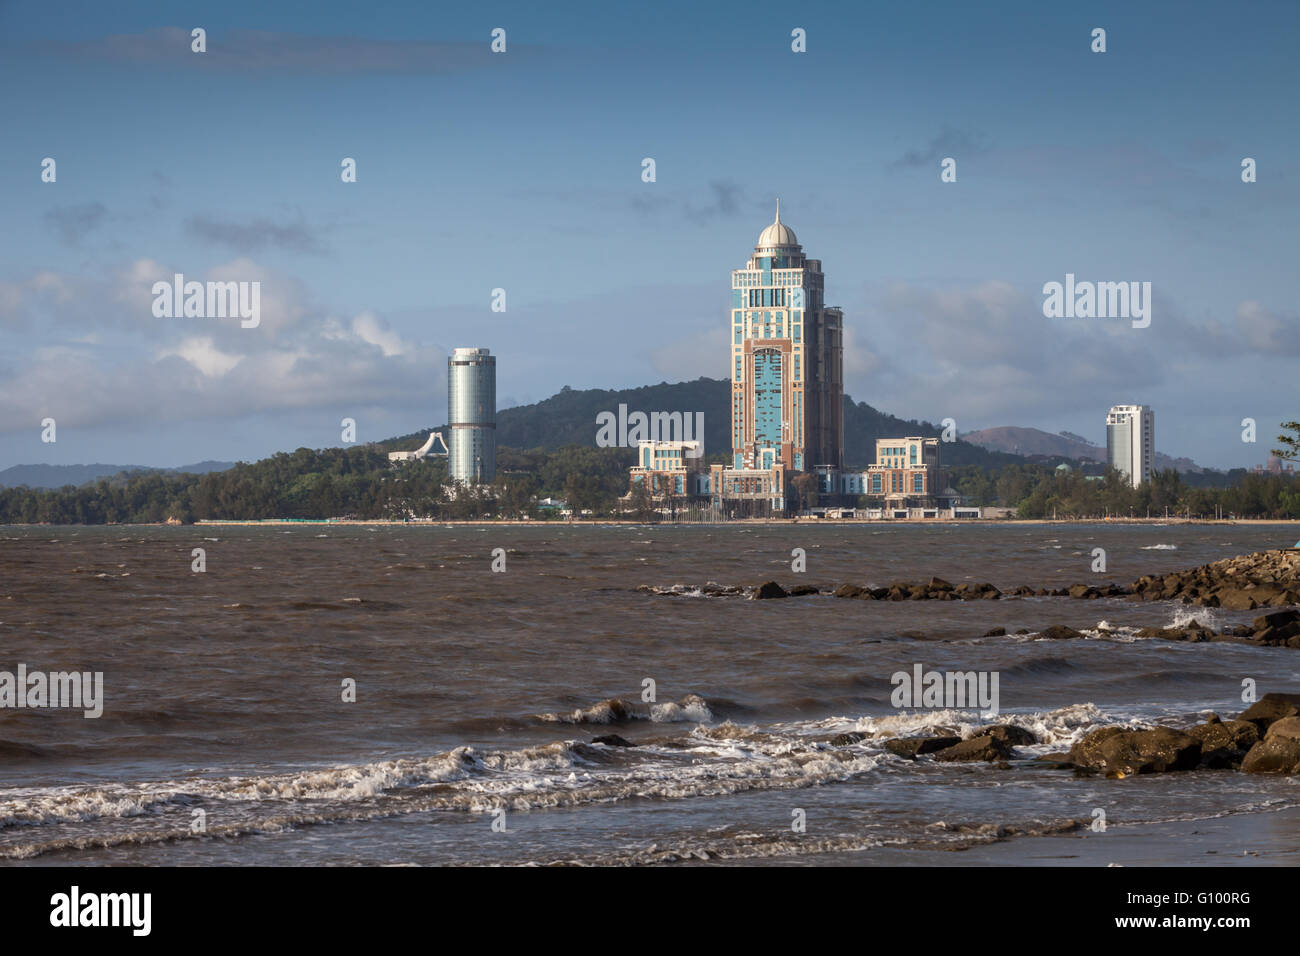 Sabah State Administrative Centre seen from the beach in Kota Kinabalu, Sabah, Malaysia Borneo Stock Photo